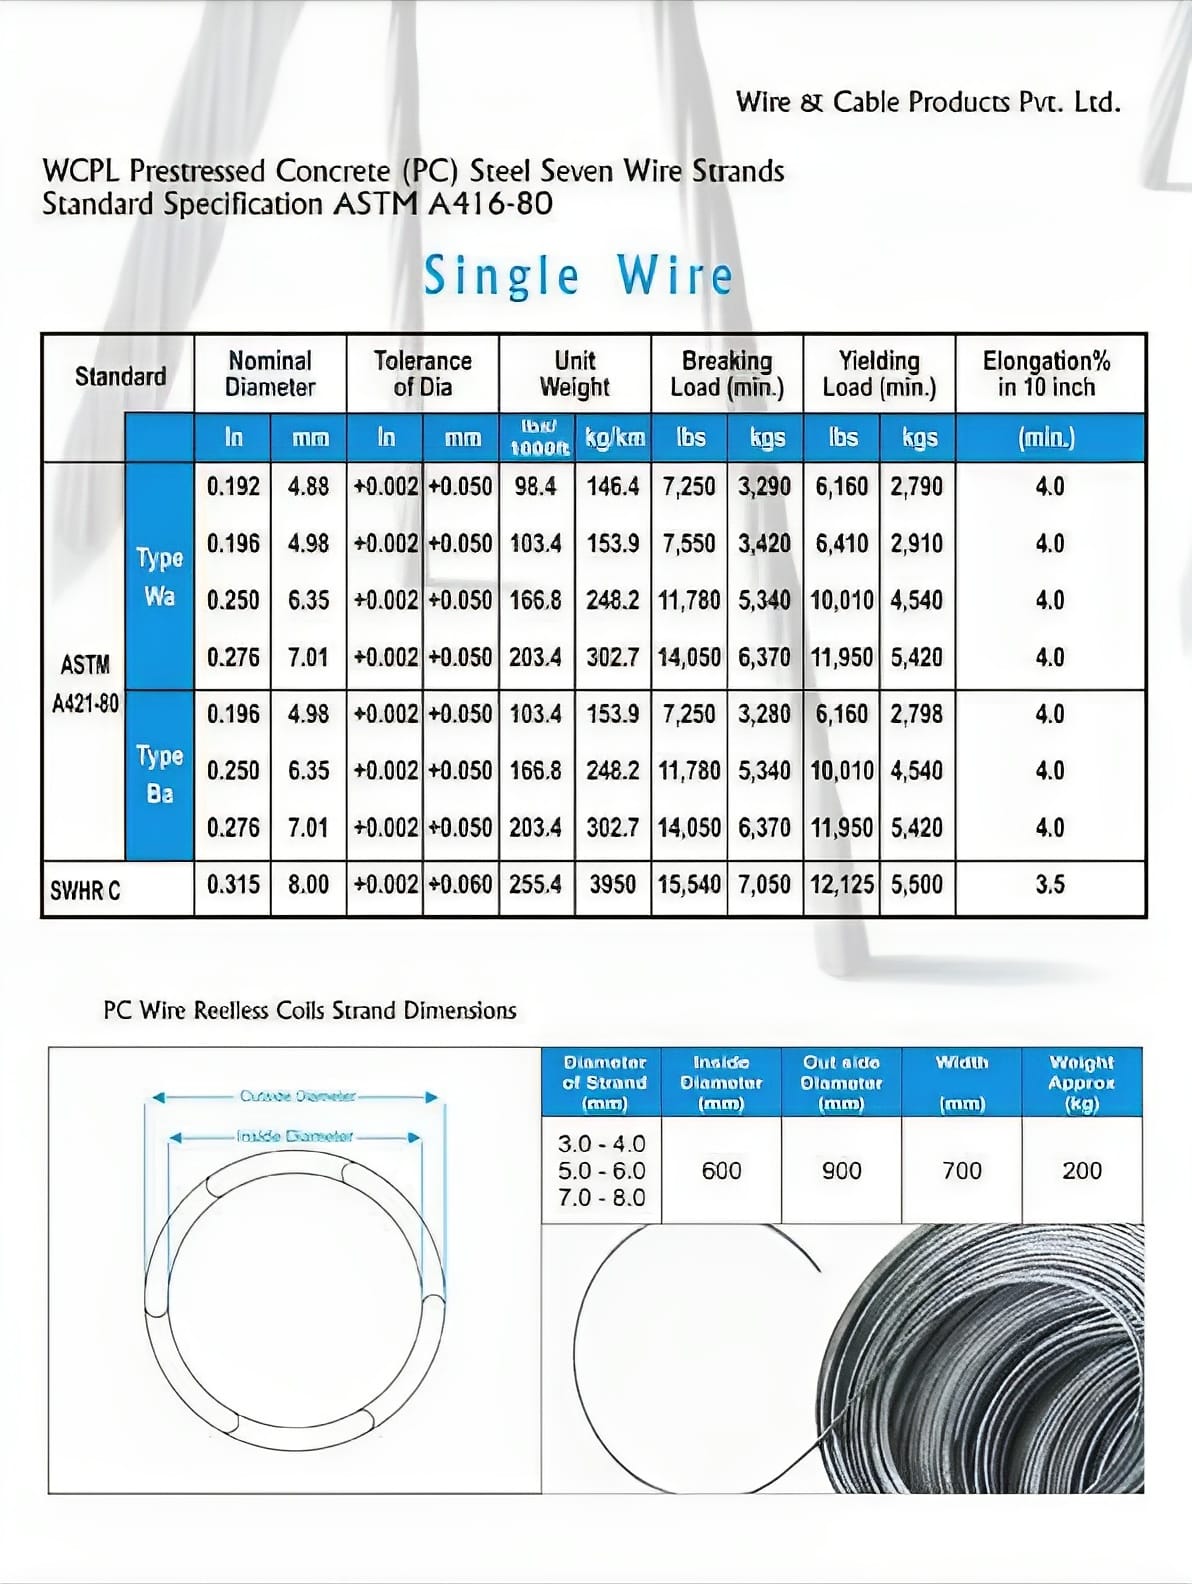 Single Wire Complete Sheet